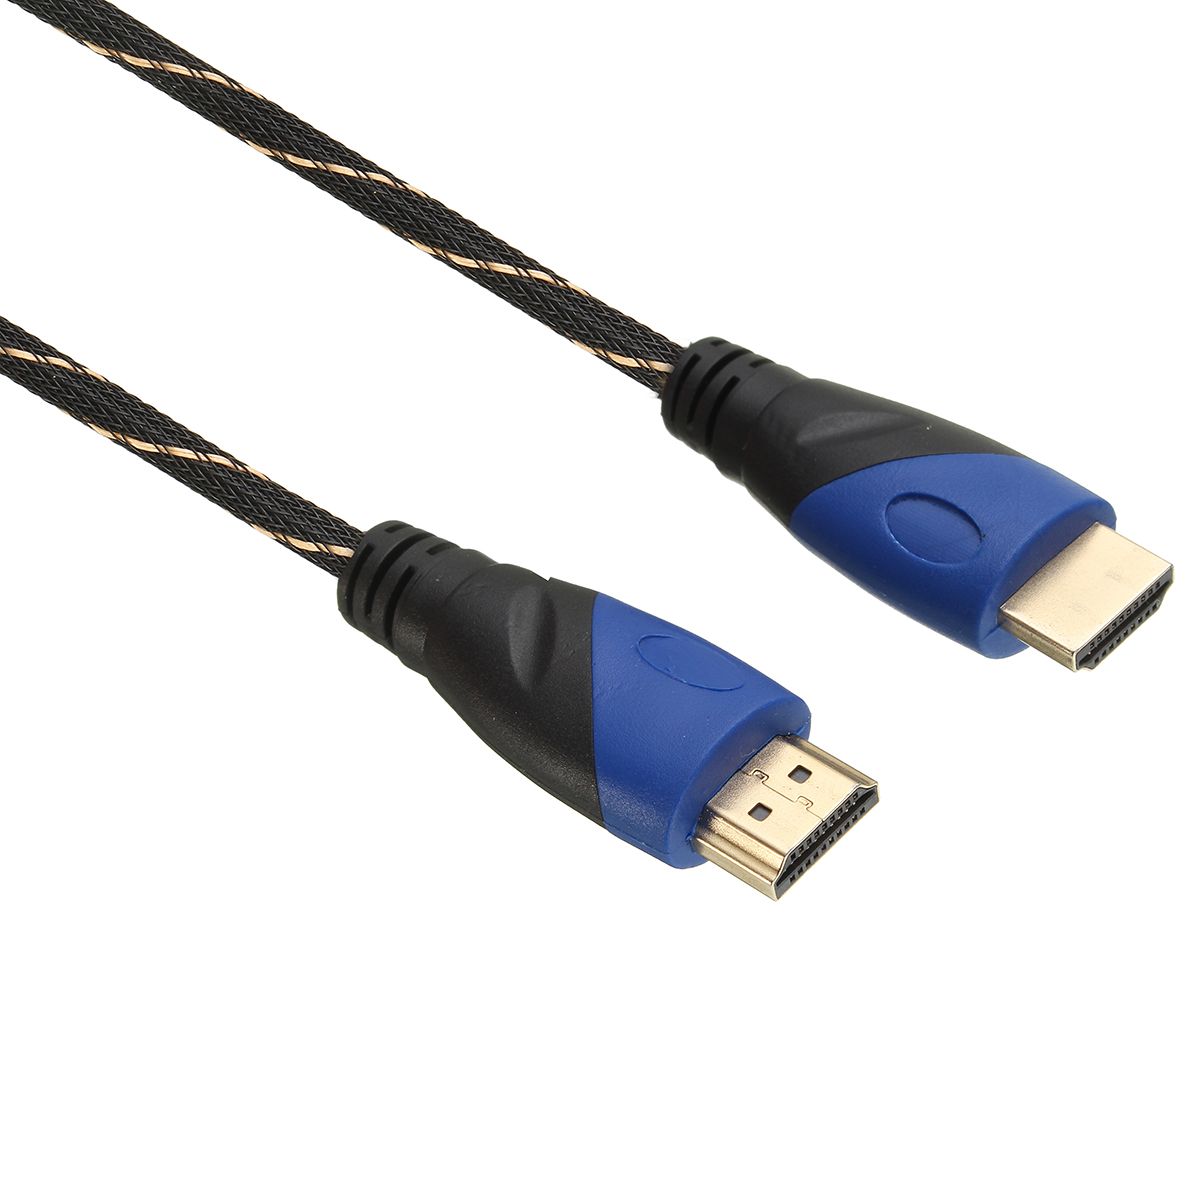 Braided-HD-Cable-V14-1080P-HD-3D-for-PS3-Xbox-HDTV-with-DVI-Connector-1223209